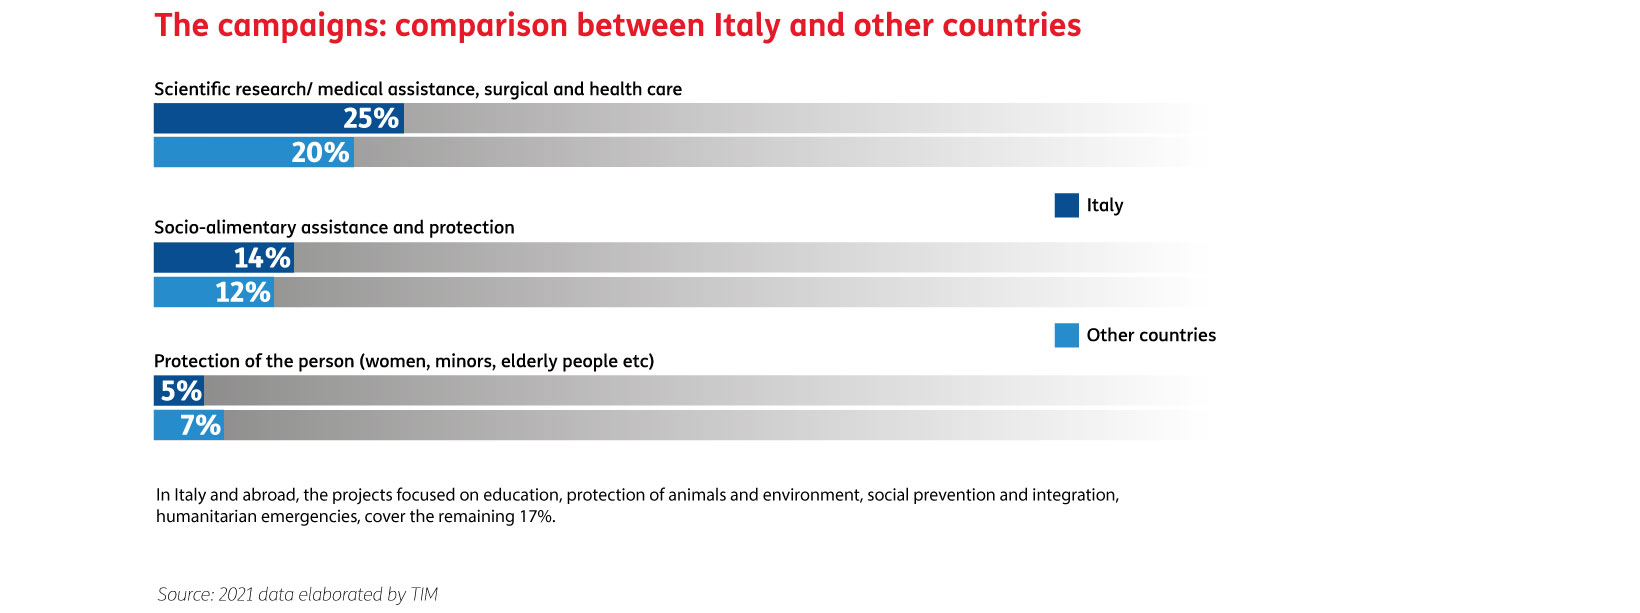 Fundraising campaigns in Italy and abroad